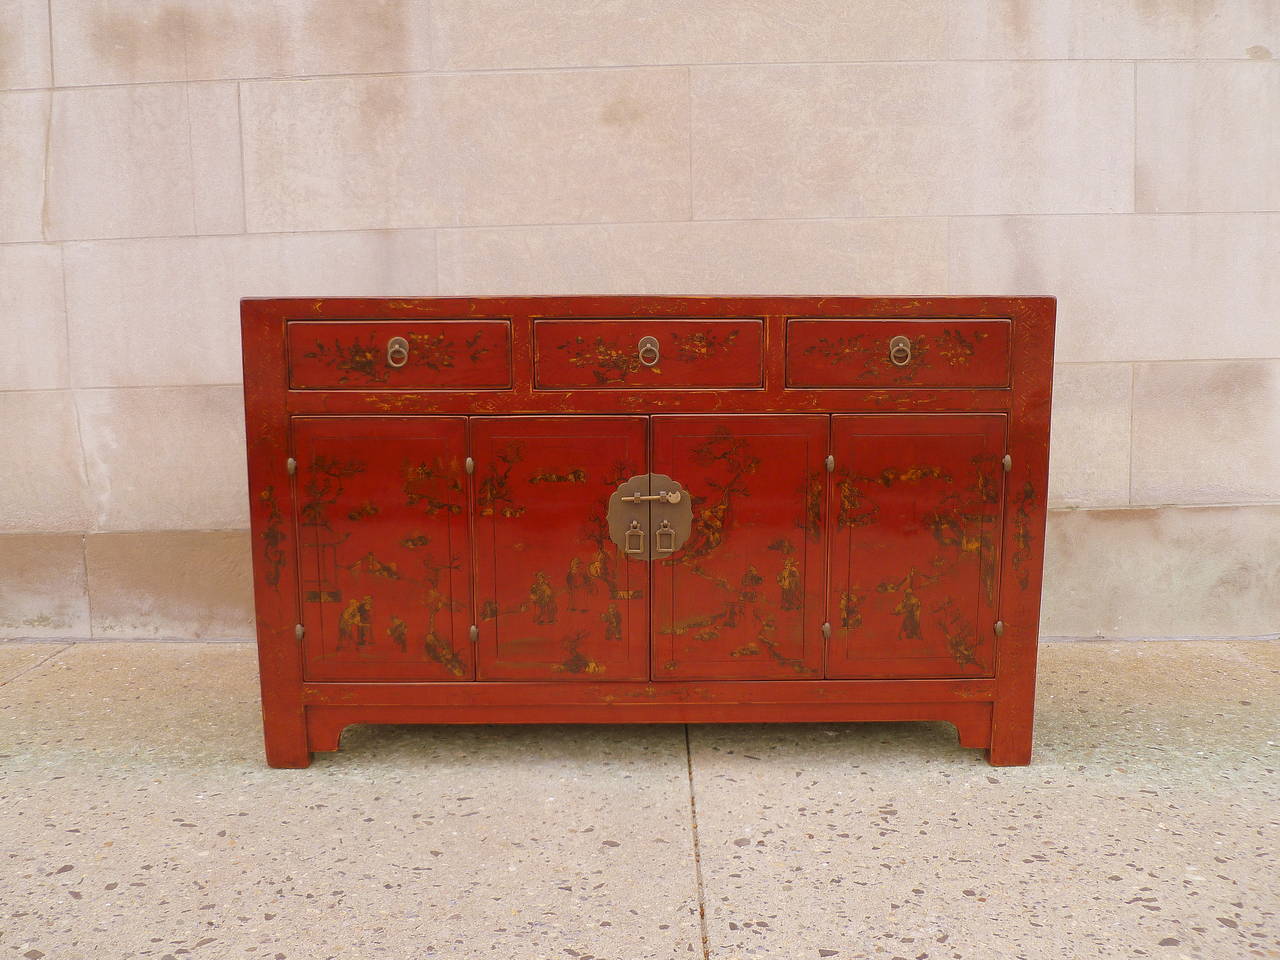 Fine red lacquer sideboard with gilt landscape motif, an elegant red lacquer sideboard with three drawers on top of a pair of bifold doors, brass fitting. Beautiful color, form and lines.